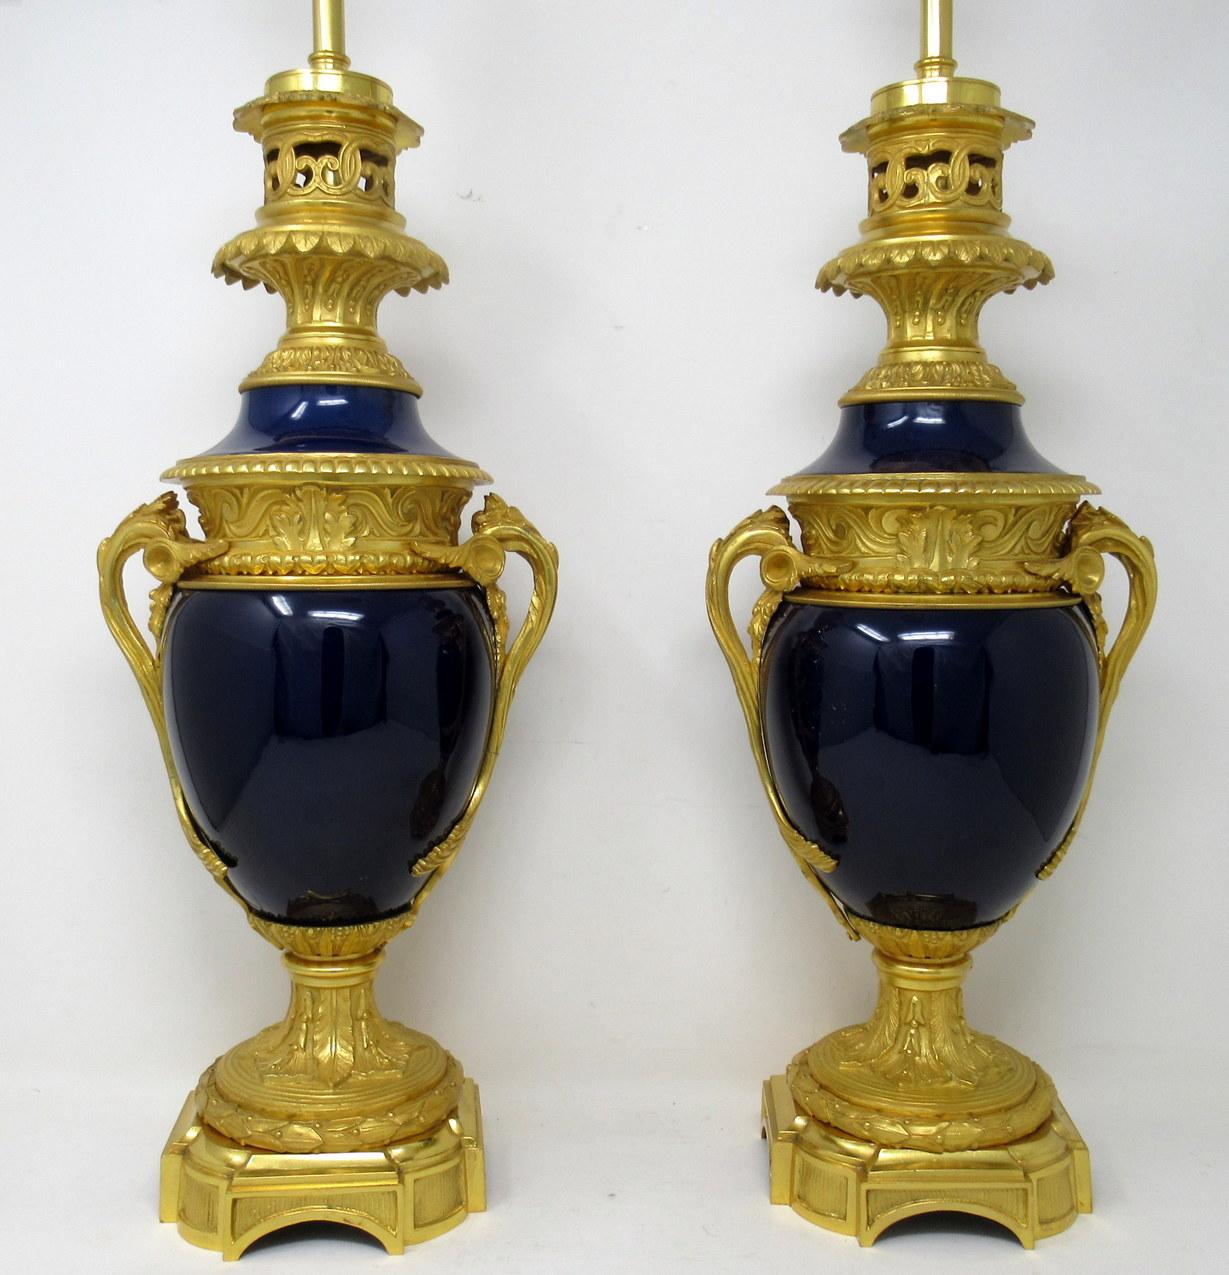 An exceptionally fine pair of heavy gauge French Glazed Porcelain oil lamps of impressive proportions, with ornate Ormolu bases now converted to electric table lamps, of good size proportions, mid to early nineteenth century. 

The main Cobalt blue